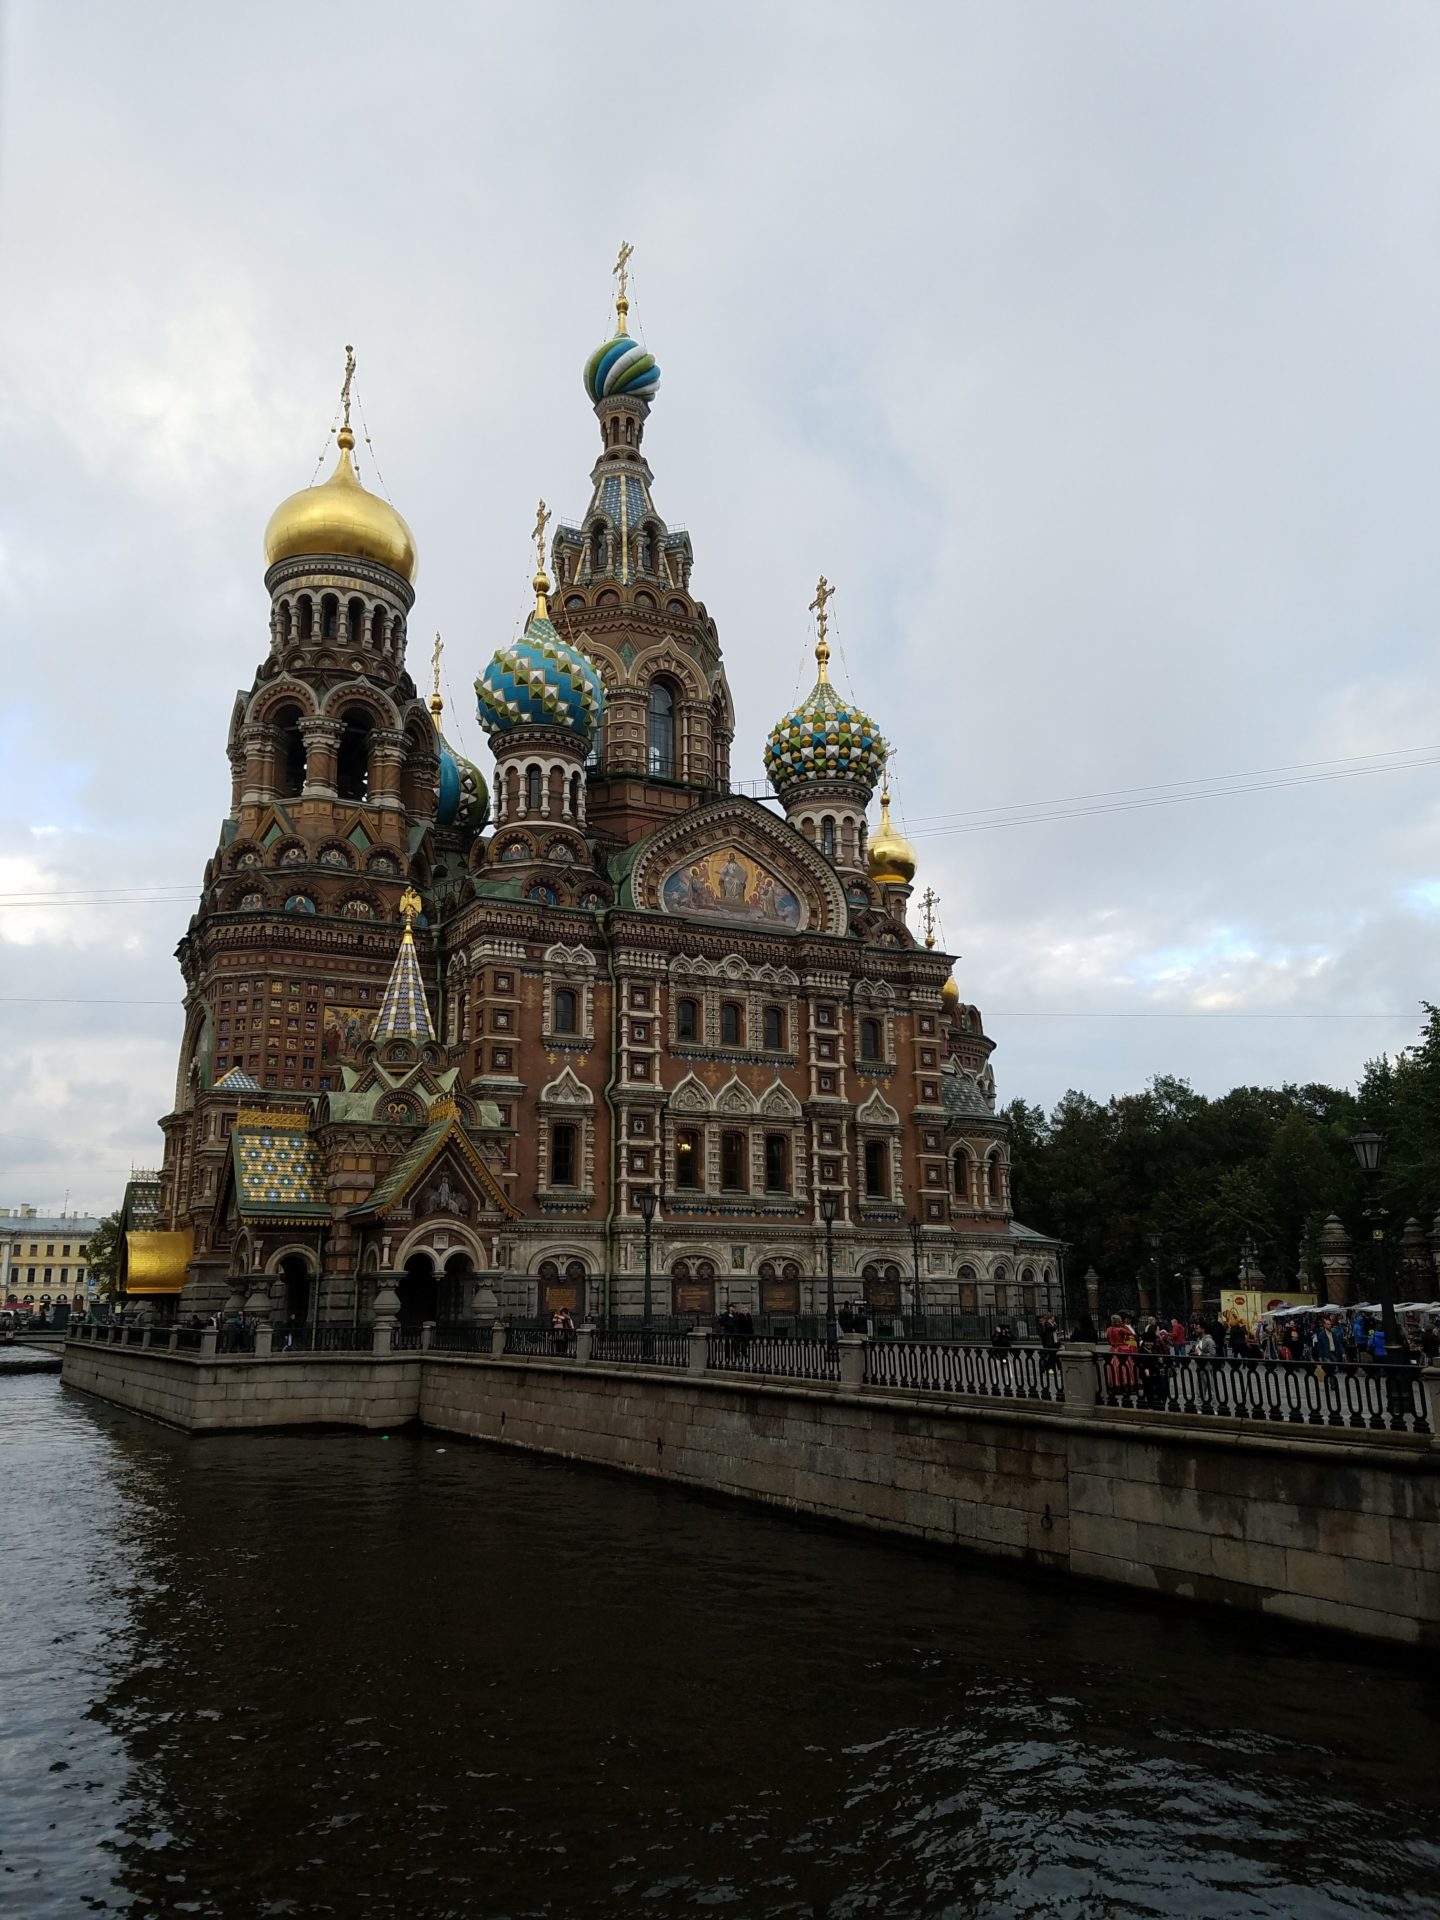 Church of the Savior on Blood with many domes and crosses